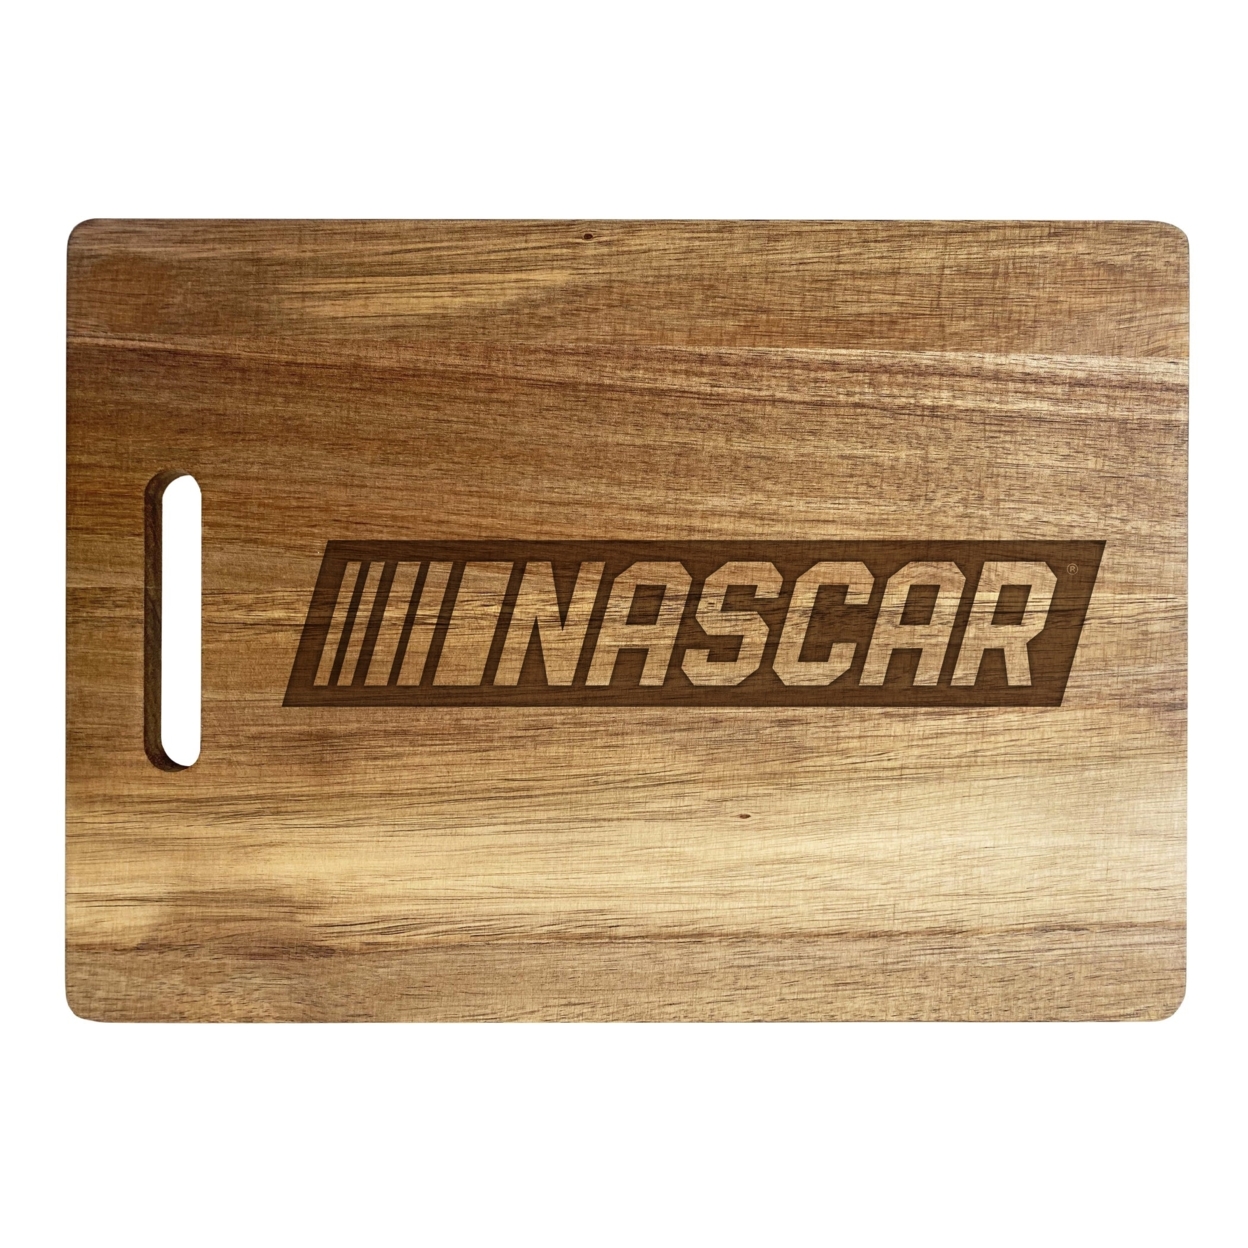 NASCAR Officially Licensed Engraved Wooden Cutting Board